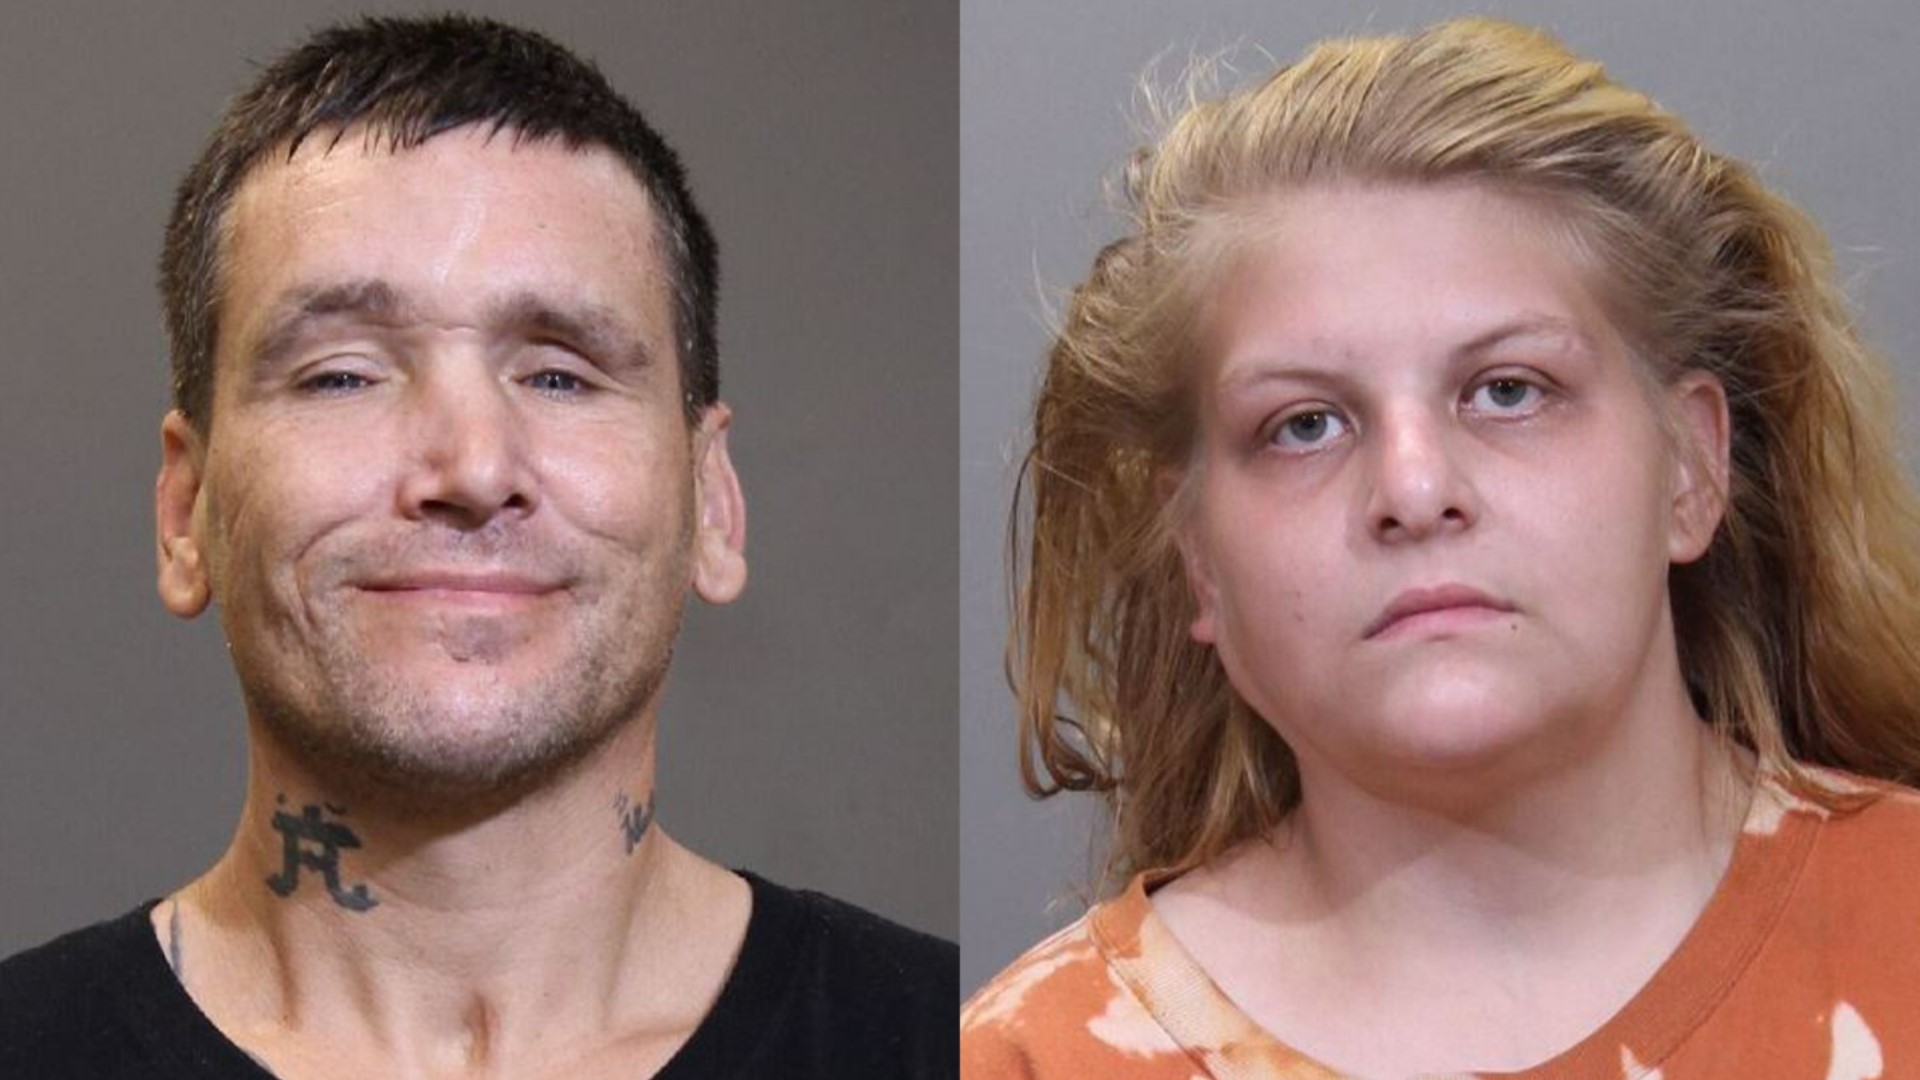 Robert Beine and Miranda King are charged with murder and gross abuse of a corpse in the death of William Hamblin.